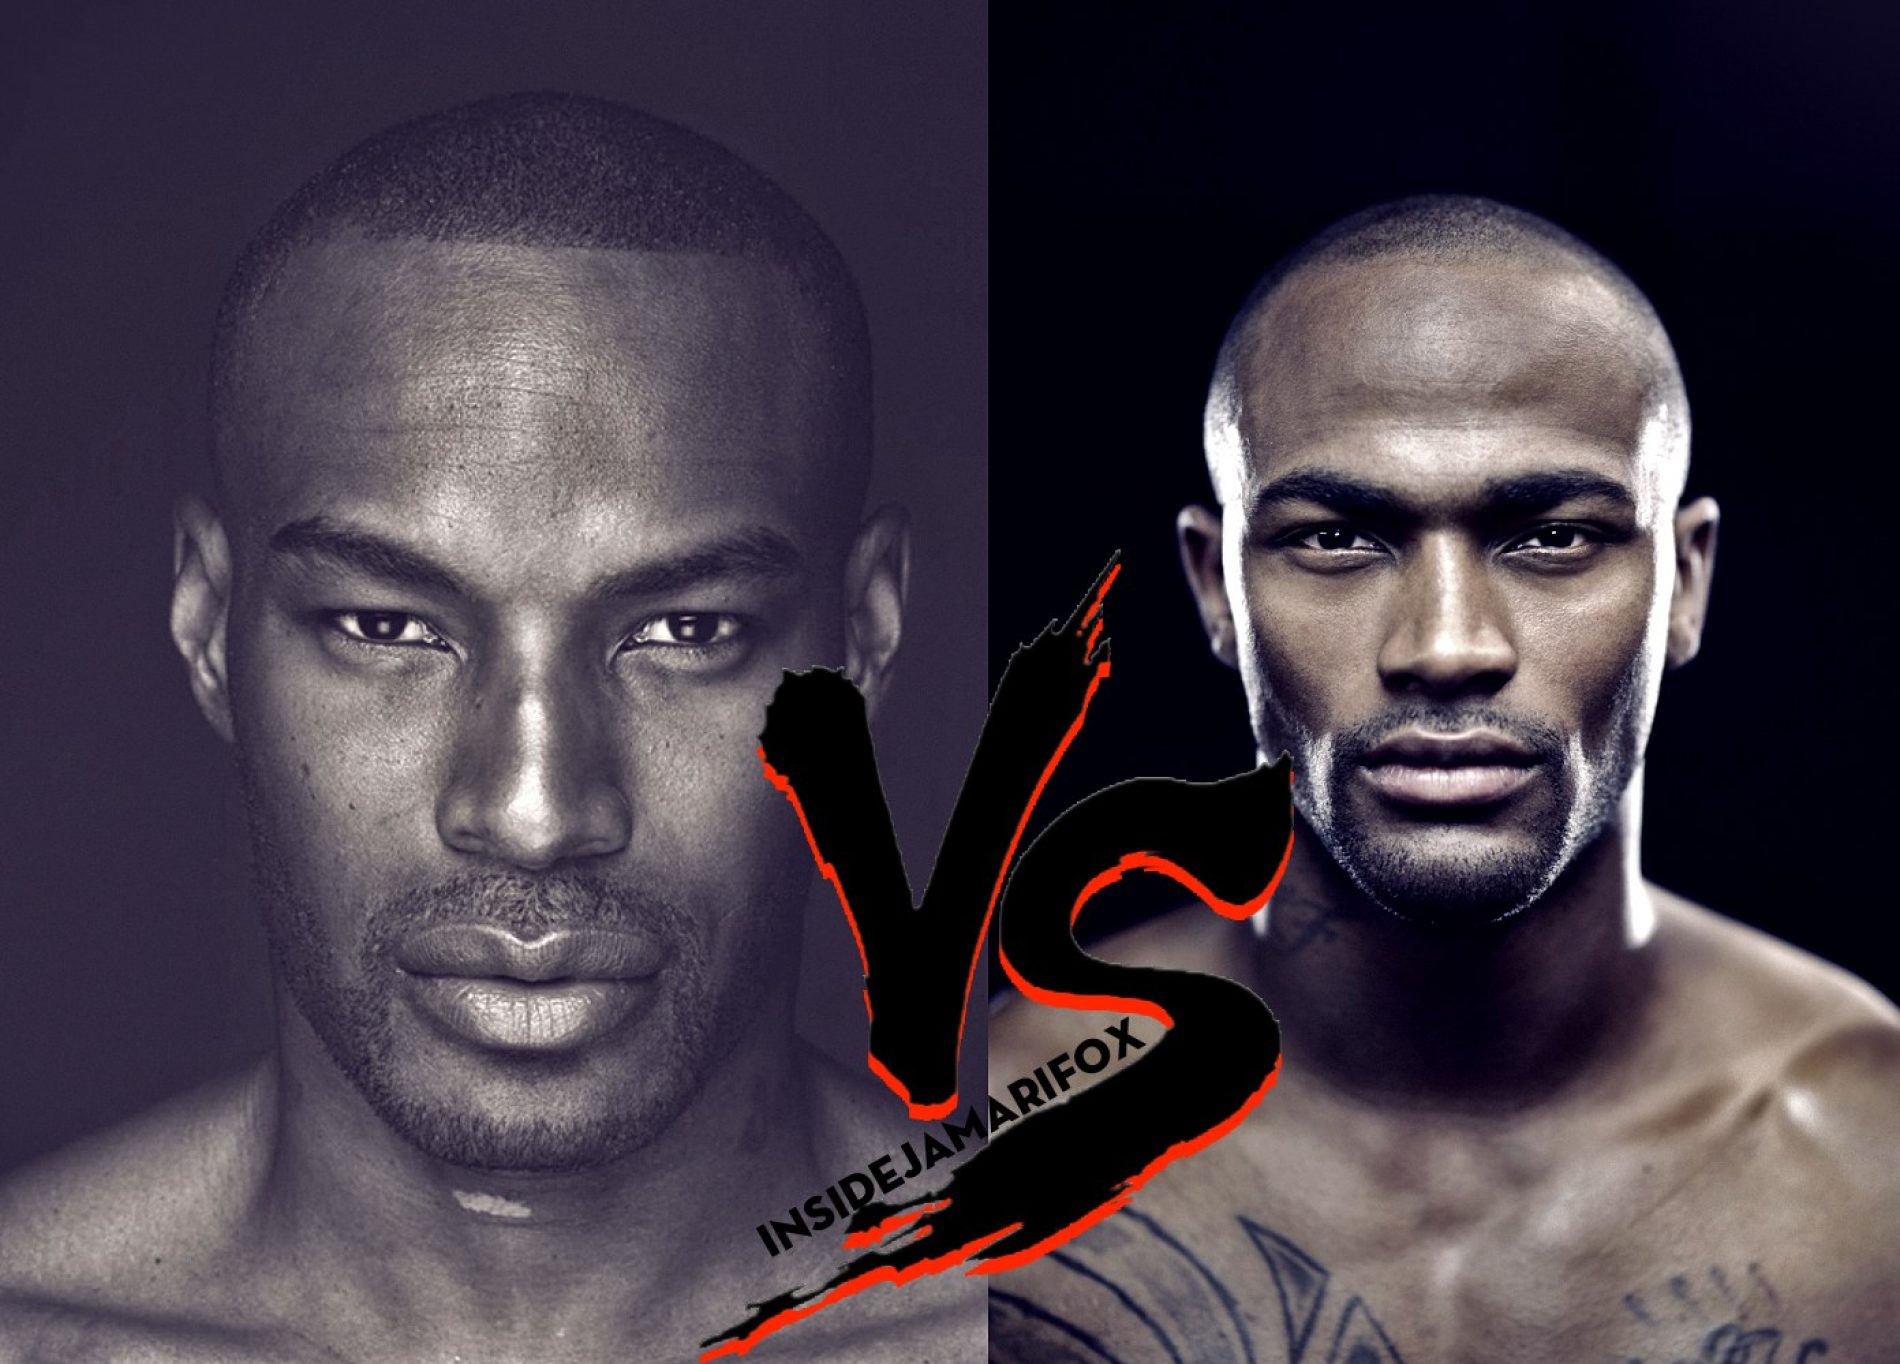 So It Is A Tyson Beckford vs. Keith Carlos beef